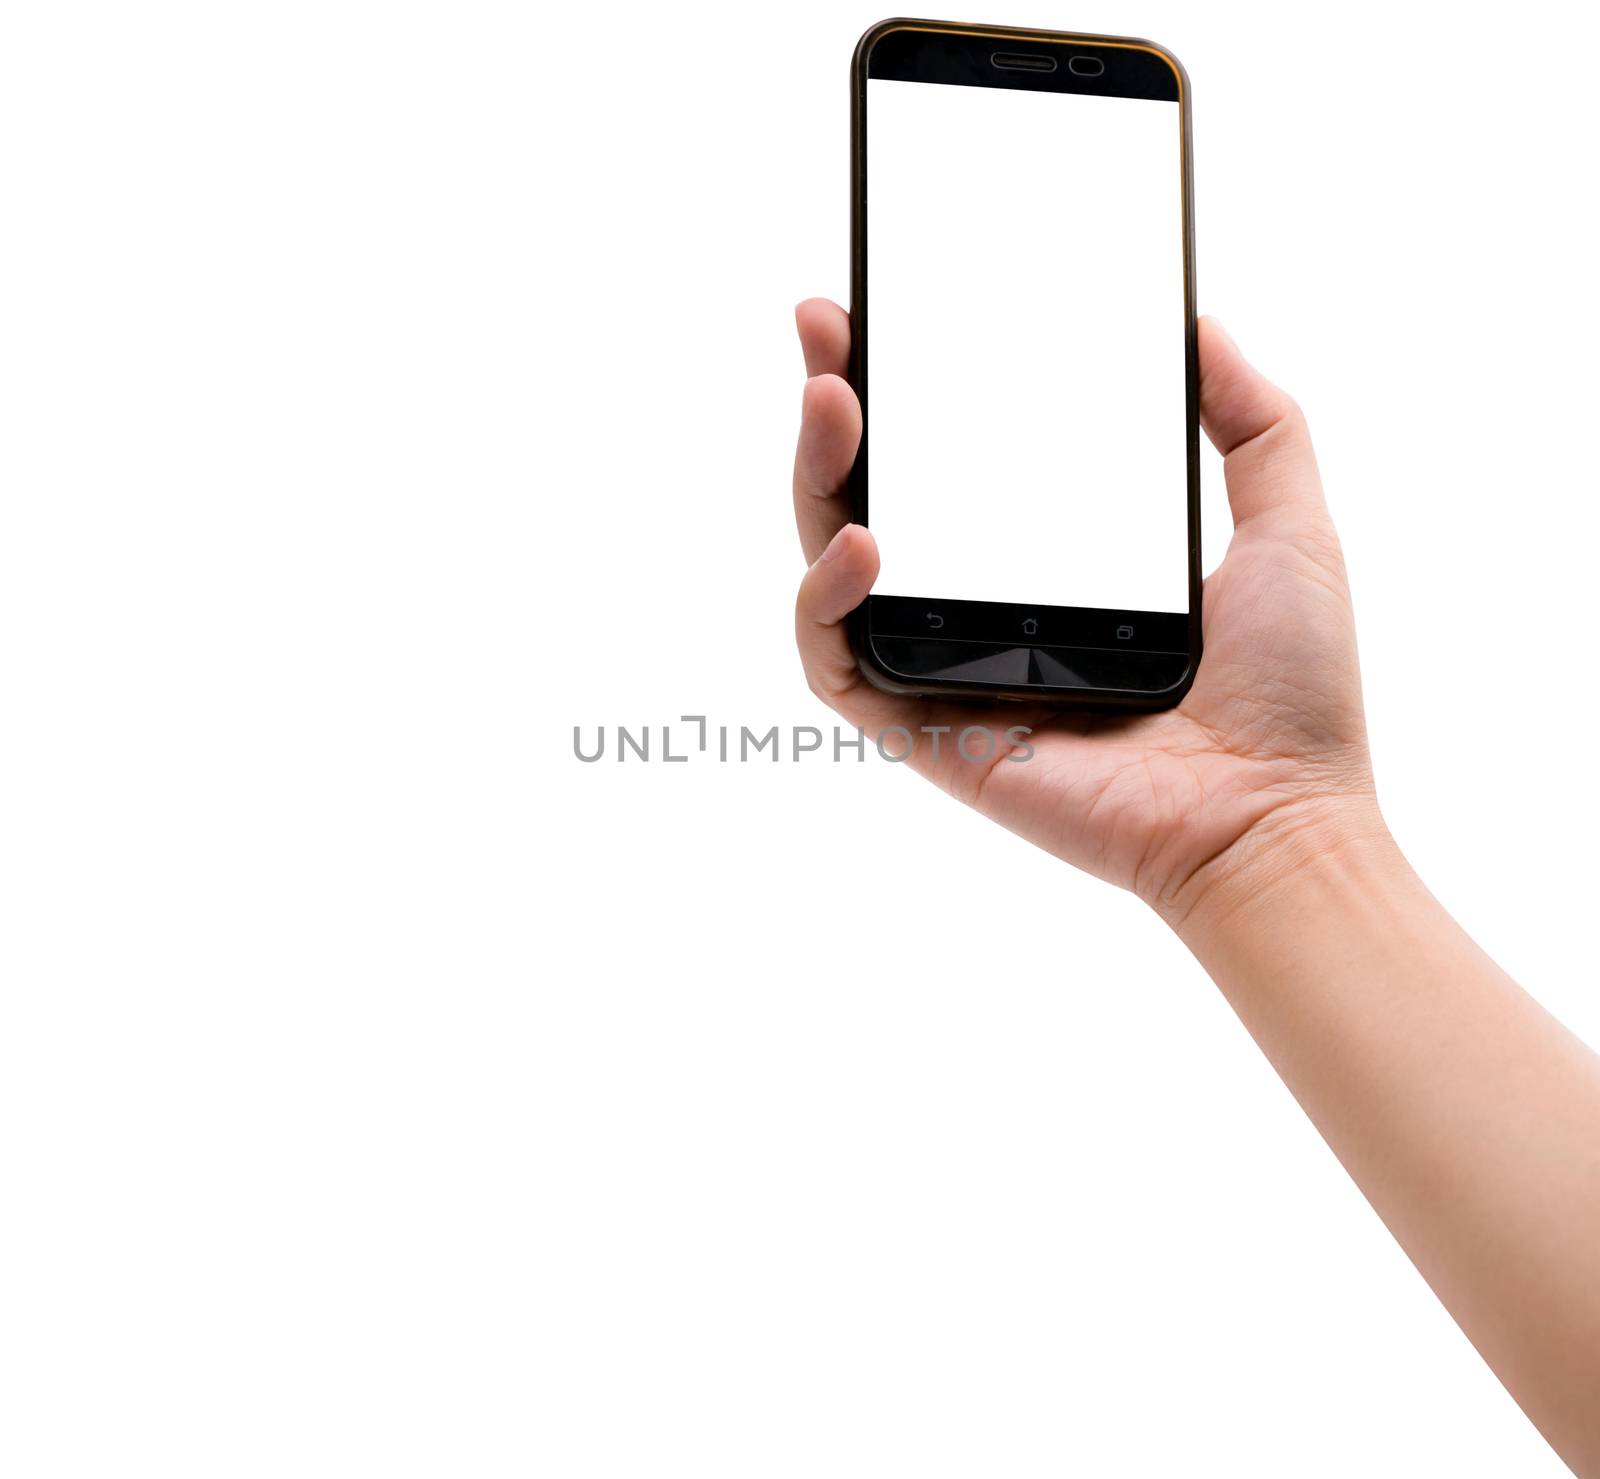 Asian people right hand holding empty screen phone and using smart phone selfie photo isolated on white background with clipping path